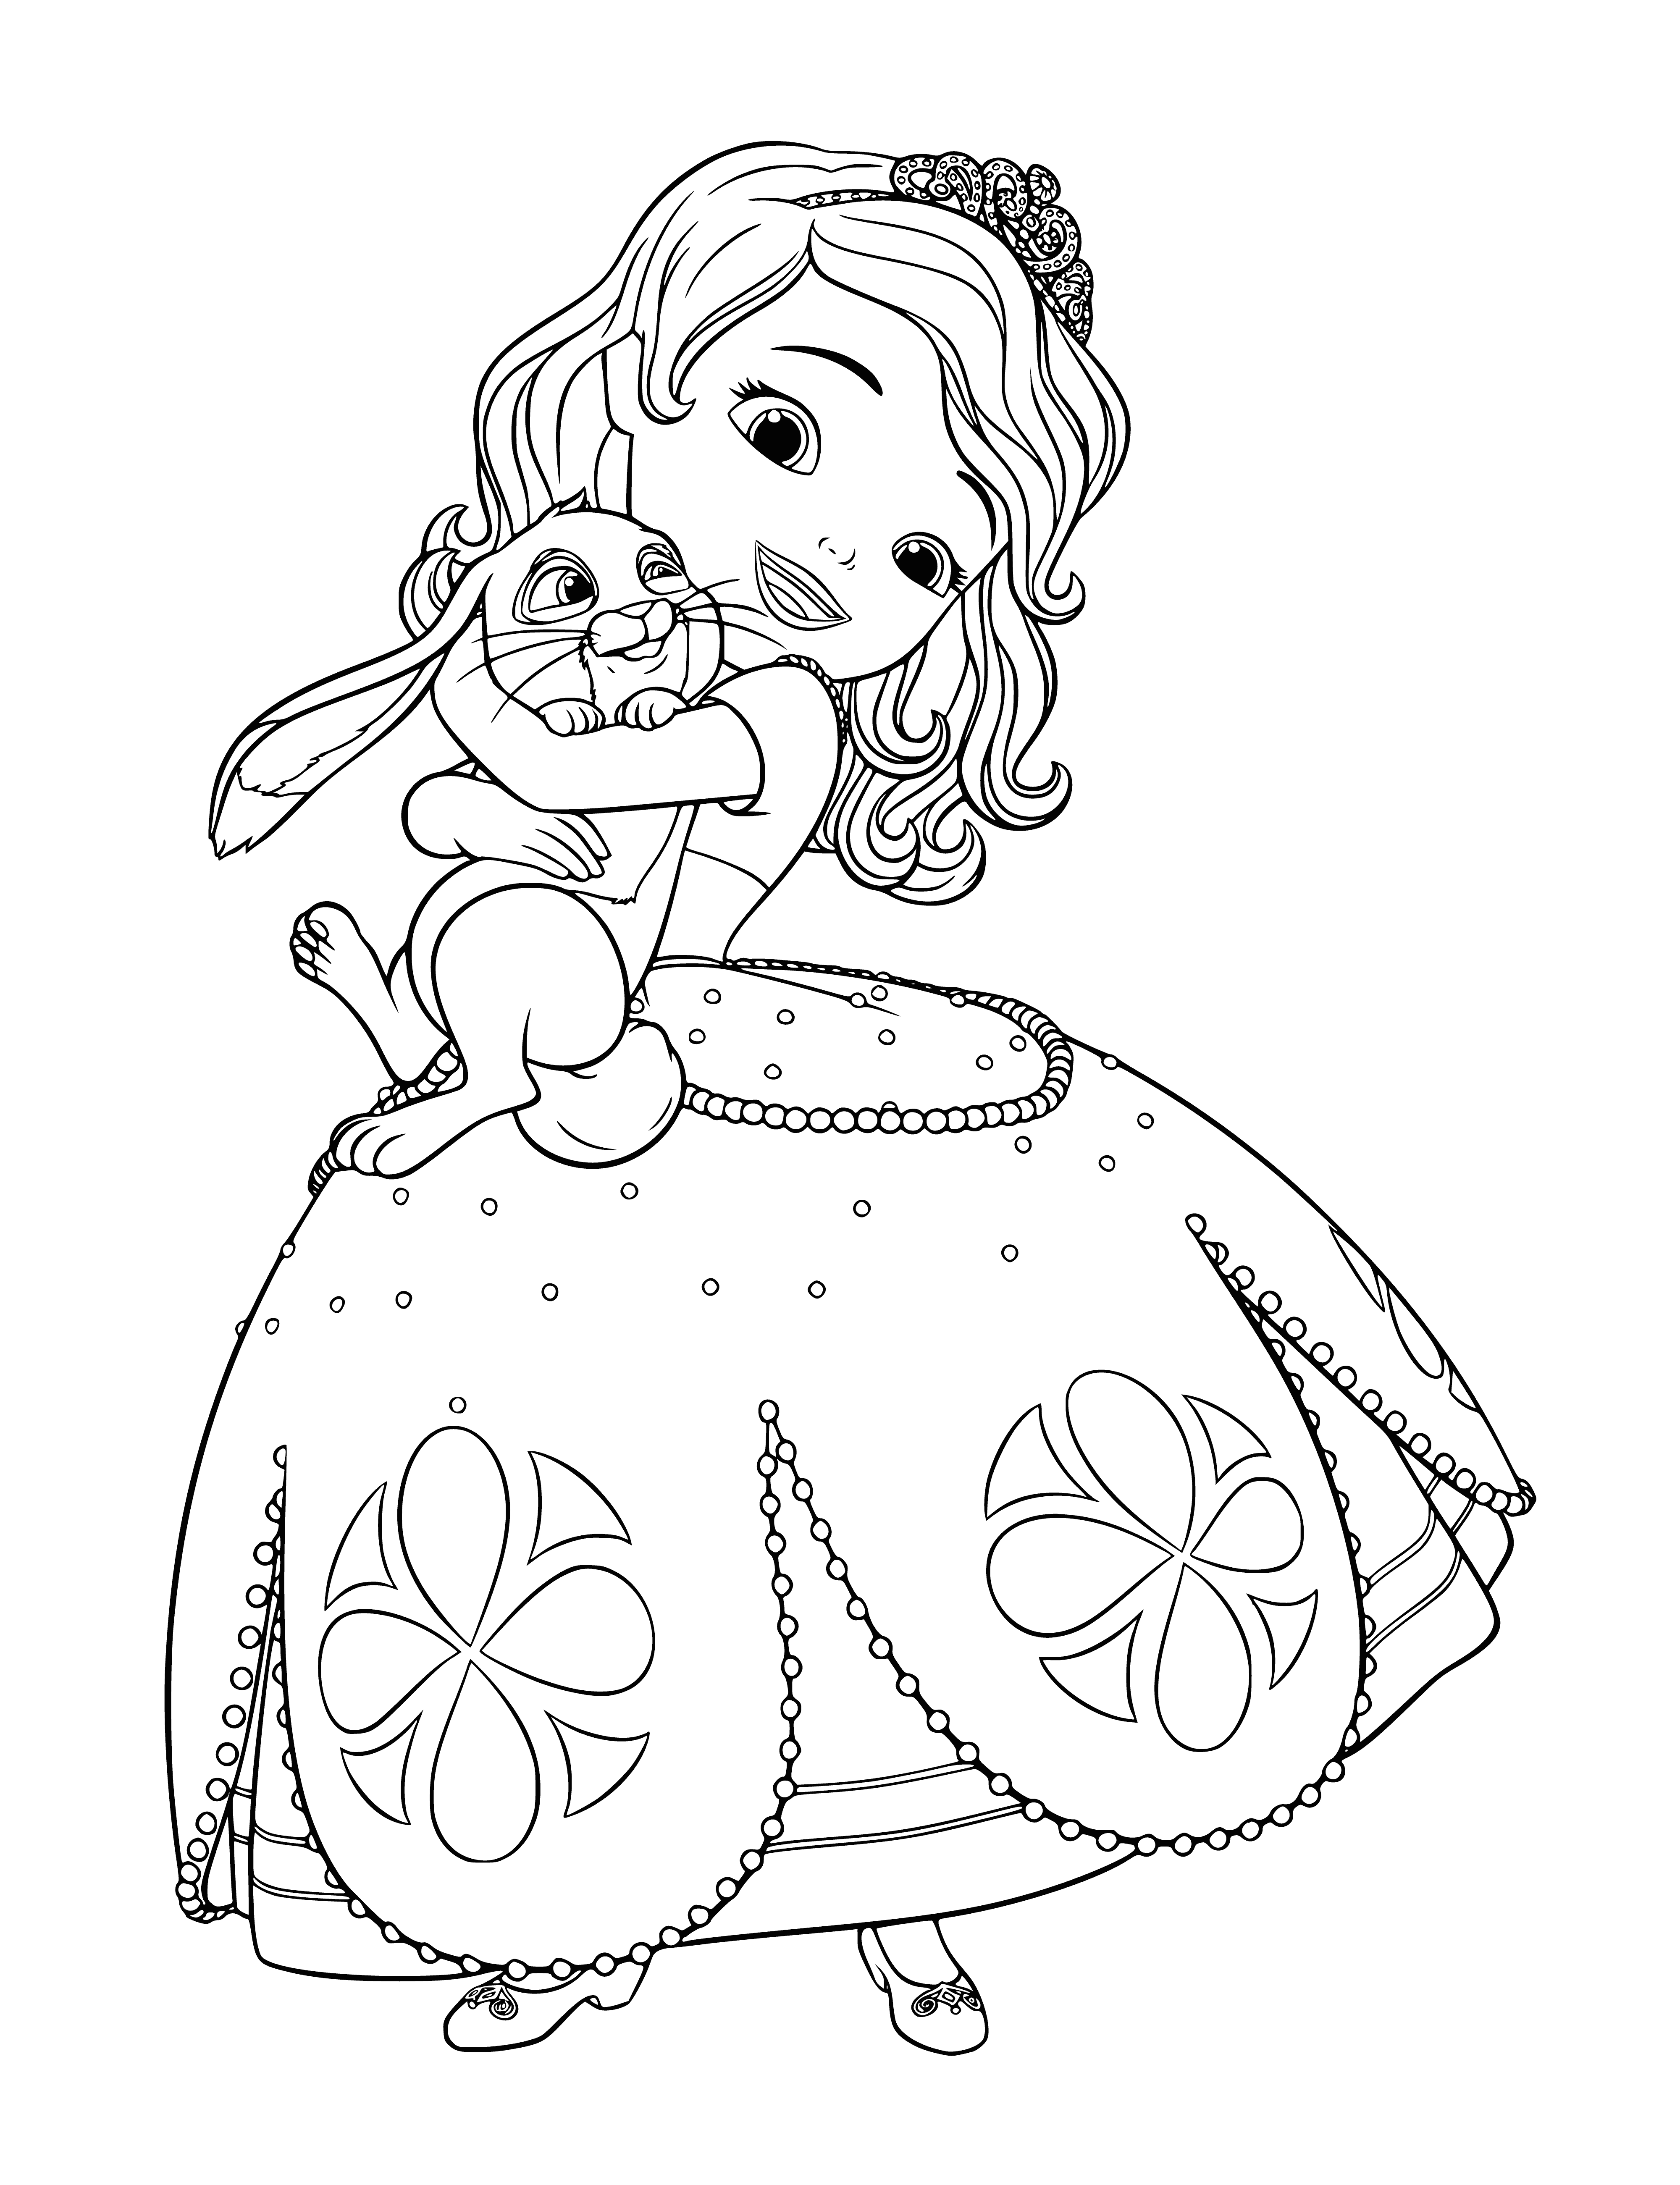 coloring page: Sofia and Clover, friends dressed up in princess outfits, smile happily together for the camera.